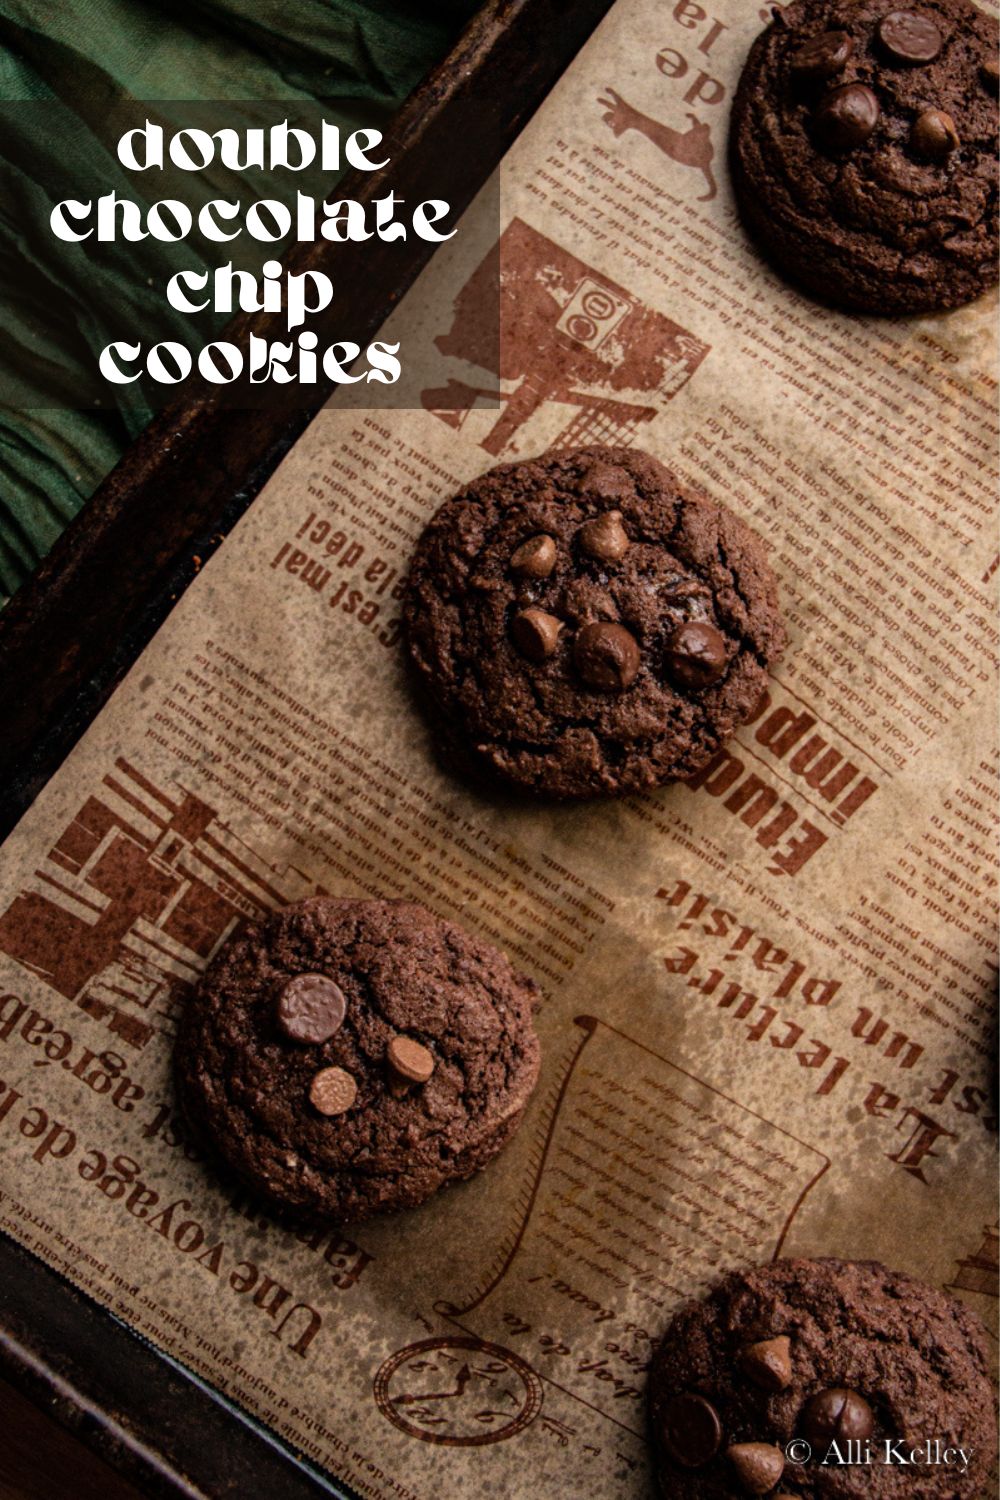 These double chocolate chip cookies are beyond good - they're heavenly! Seriously, this cookie recipe is made for any chocoholic out there. My double chocolate chip cookies are full of milk and semi-sweet chocolate chips, giving them a rich and decadent flavor that's hard to resist. Trust me when I say these cookies are a guaranteed crowd-pleaser!